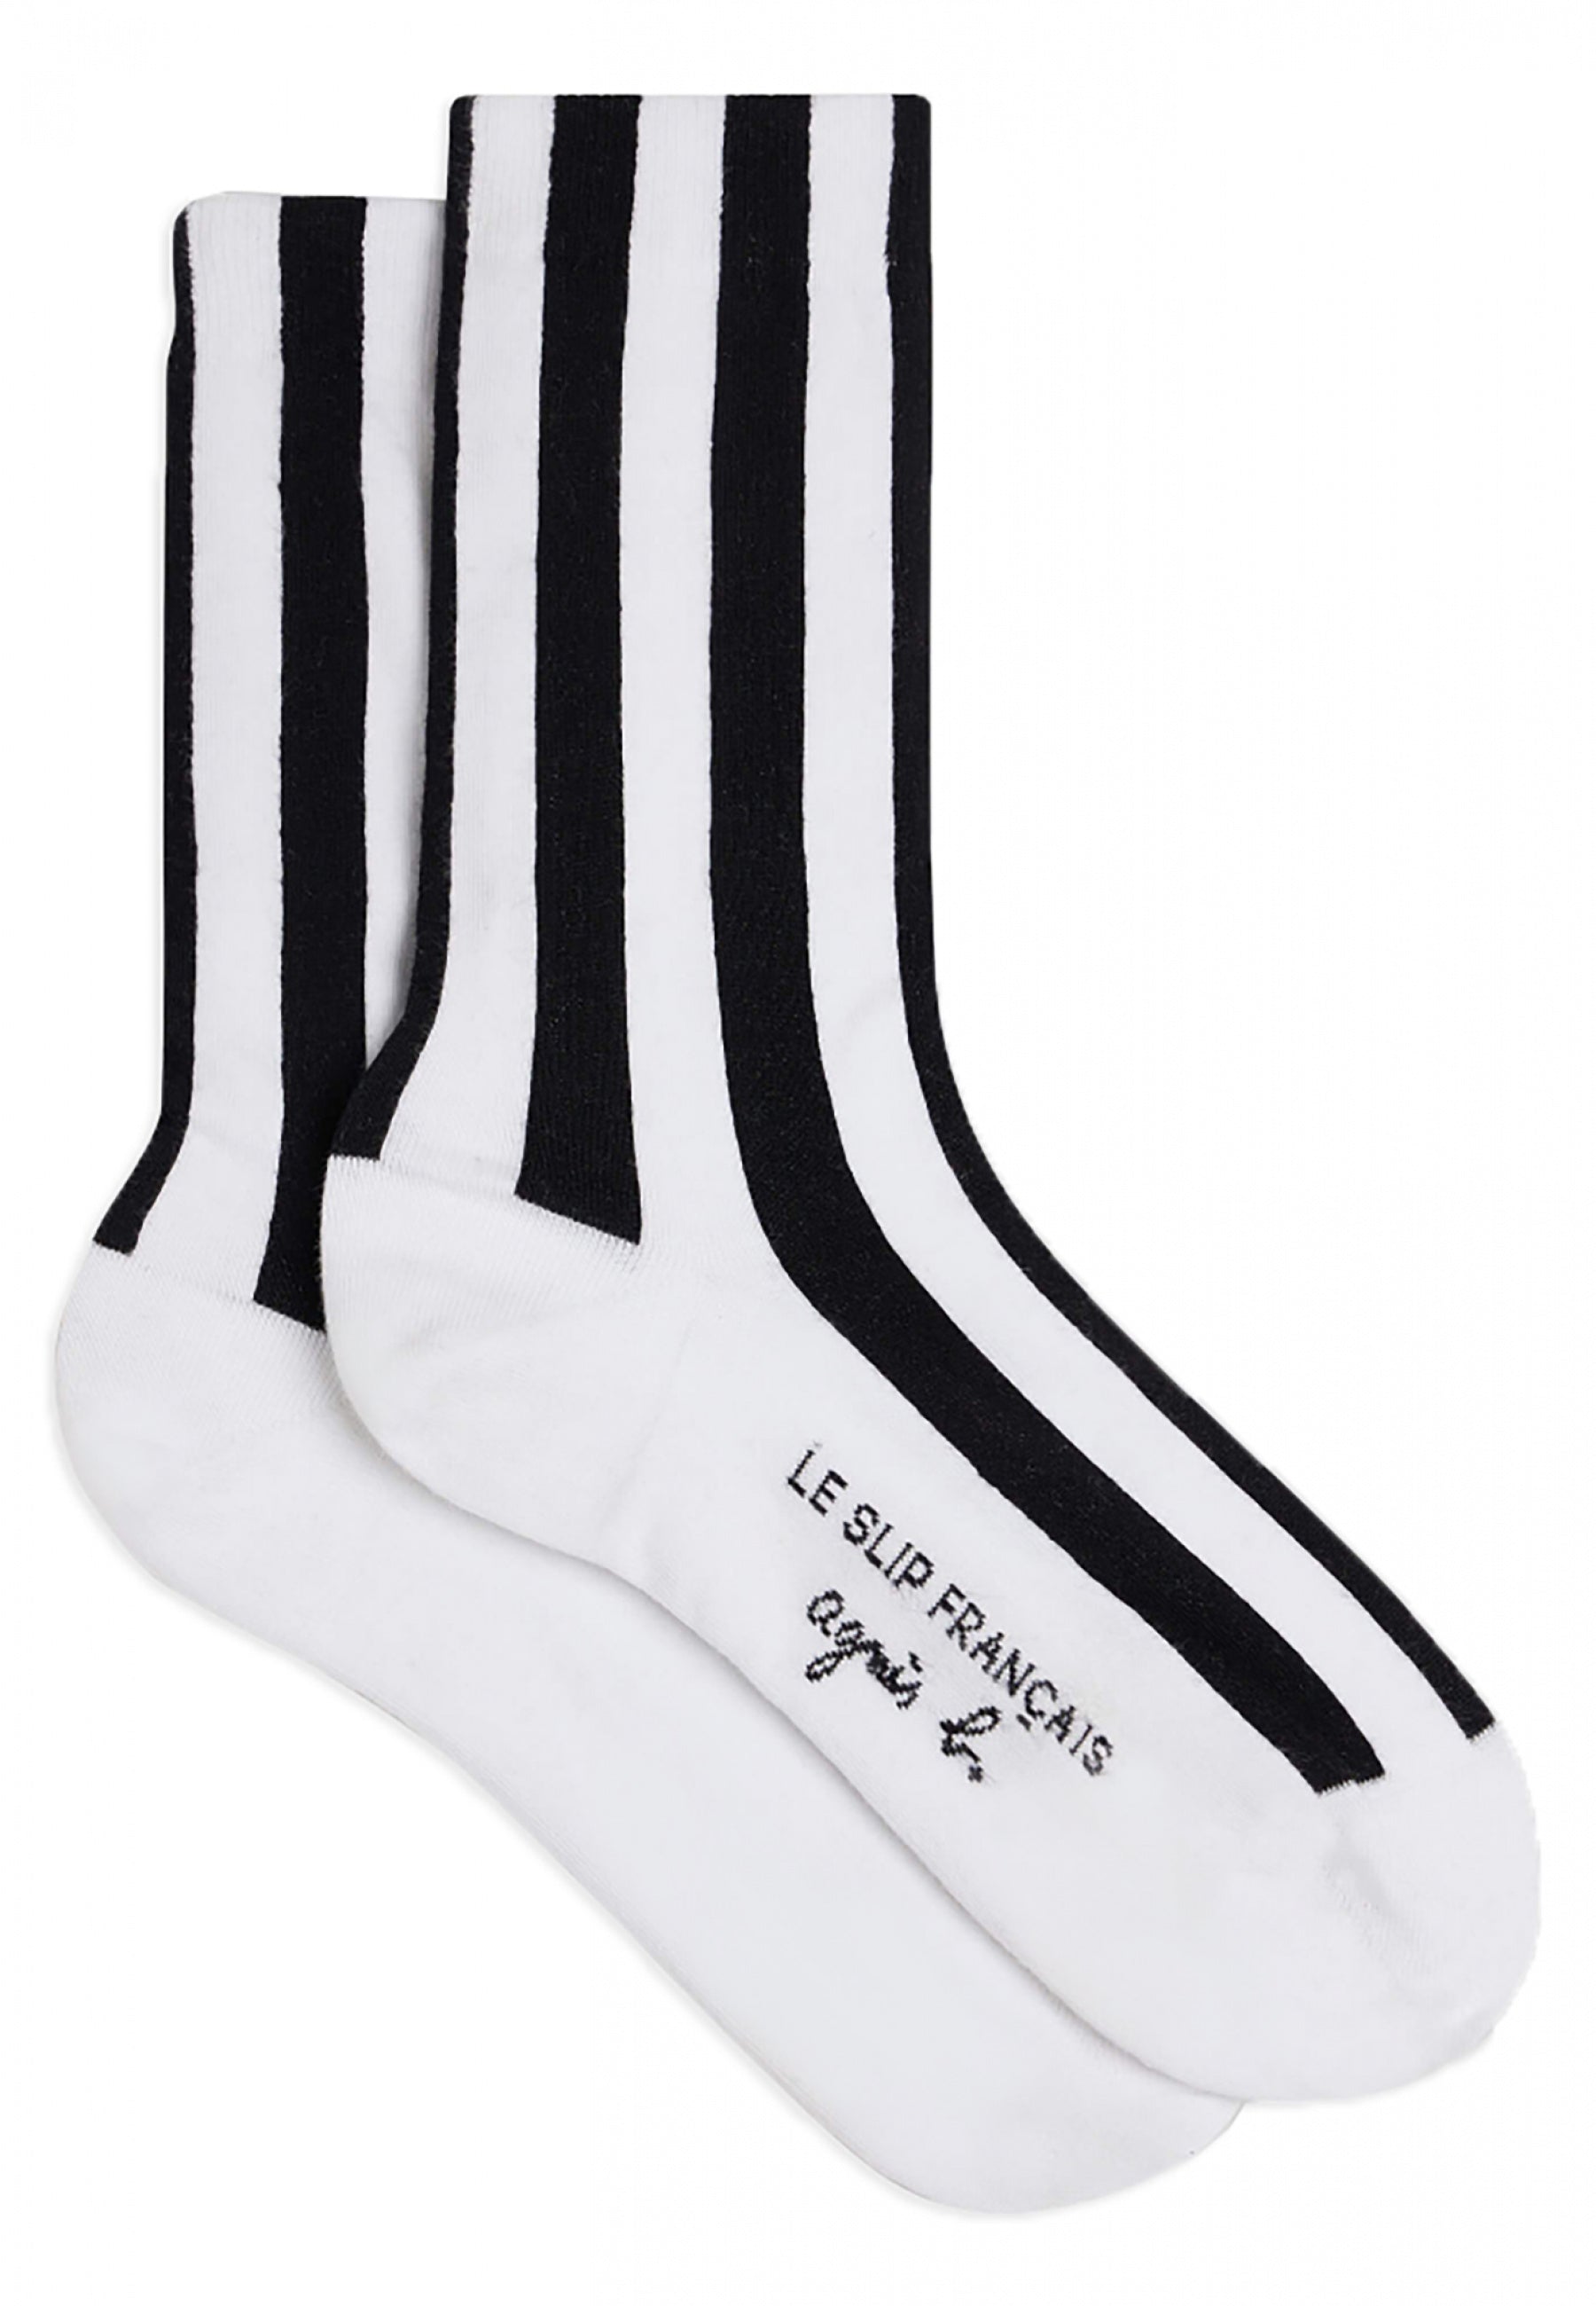 Mi chaussettes femme rayures made in France